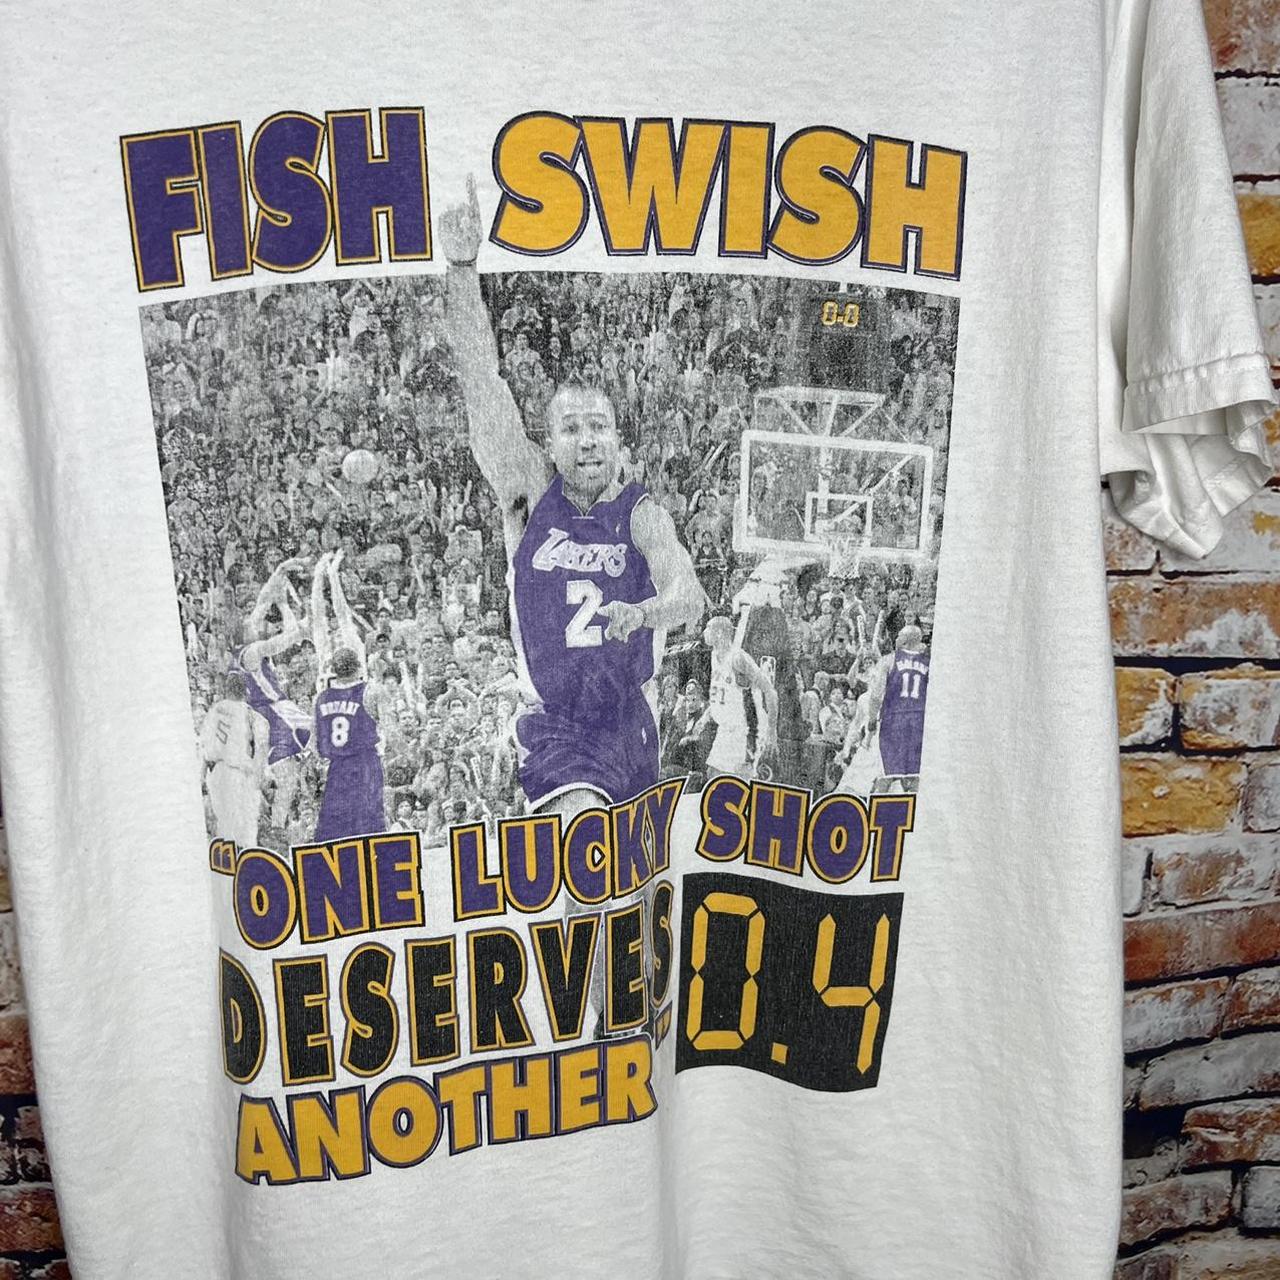 Los Angeles Lakers Derek Fisher signature buzzer second beater shirt,  hoodie, sweater, long sleeve and tank top